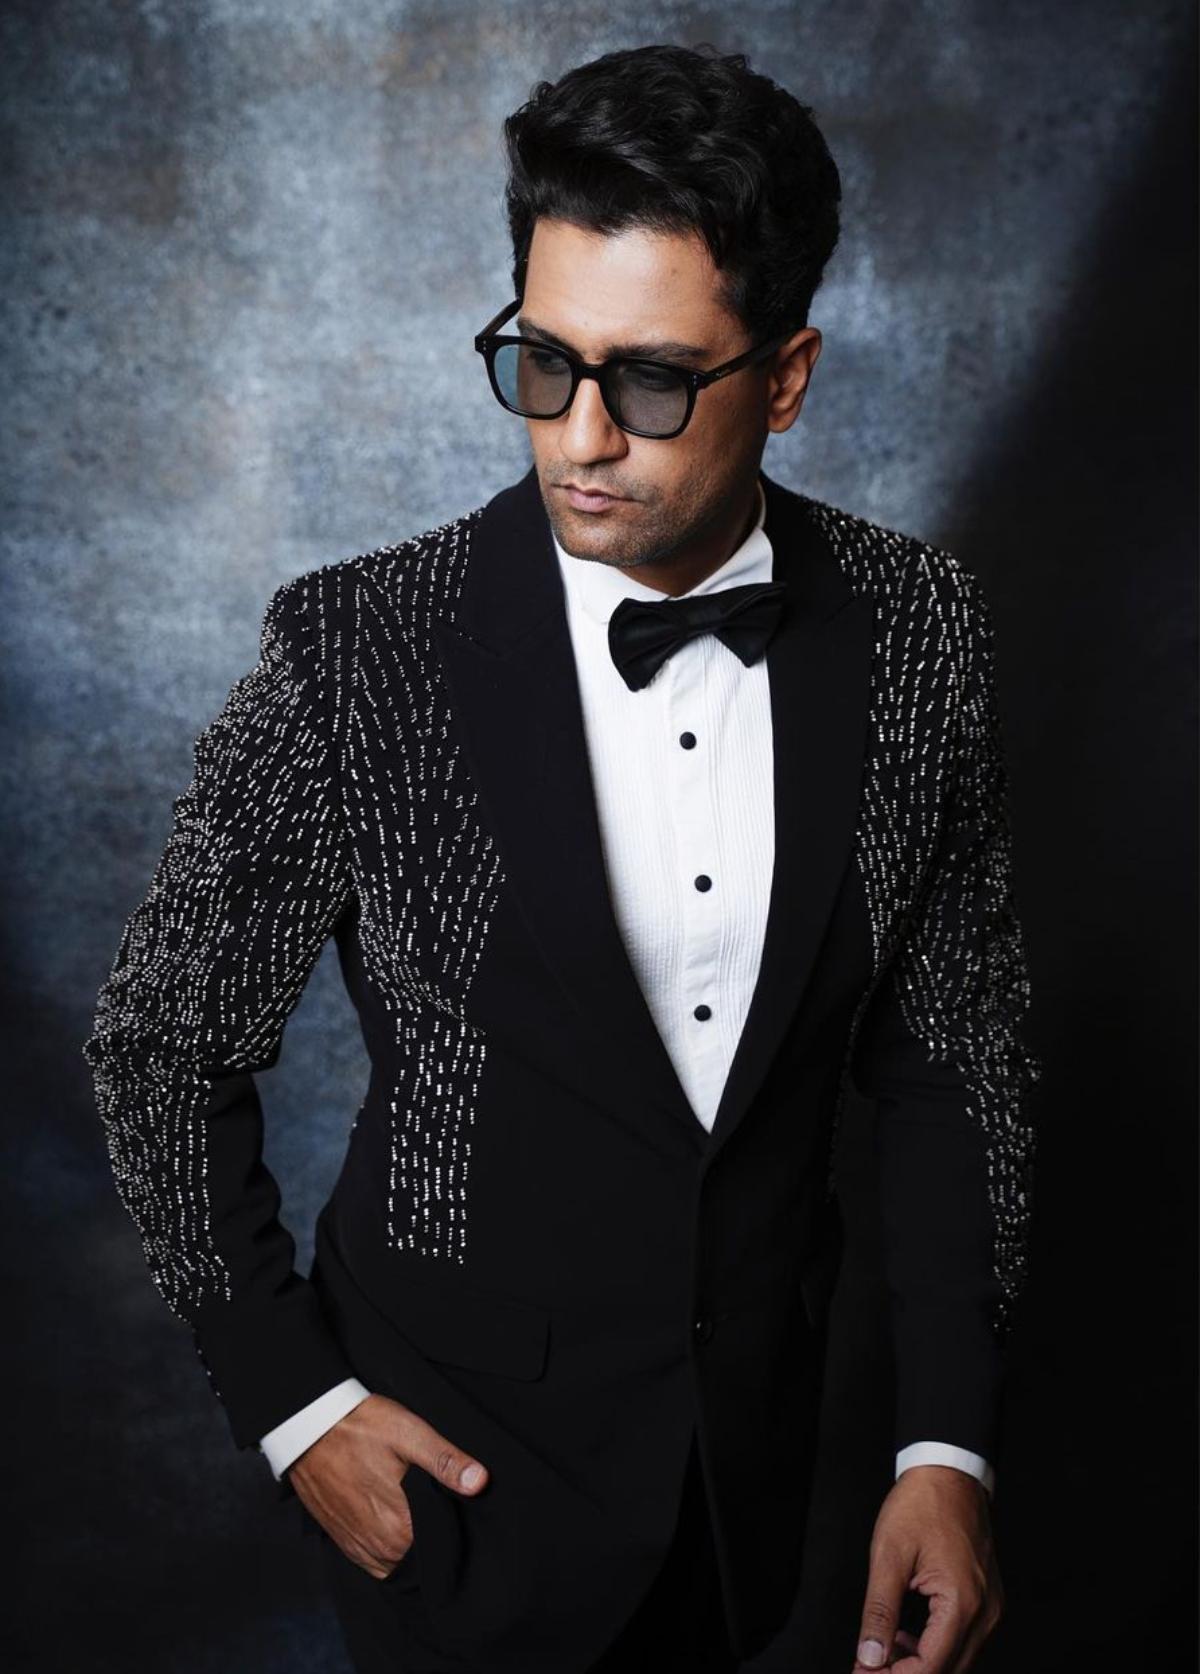 The 'Uri' star recently put his best fashion foot forward when he attended the Nykaa Femina Beauty Awards Show. Looking dapper as always, Vicky stunned when he arrived on the red carpet rocking a black tuxedo suit which consisted of an embellished single-lapel coat, matching straight-fitted pants with a crisp white shirt underneath. He kept it classy with a black bow tie. To round-off his red carpet look, Vicky rocked black-framed tinted sunglasses and sleek black shoes. With a back-swept hairdo and a clean-shaven face, the actor exuded elegance and glamour.   